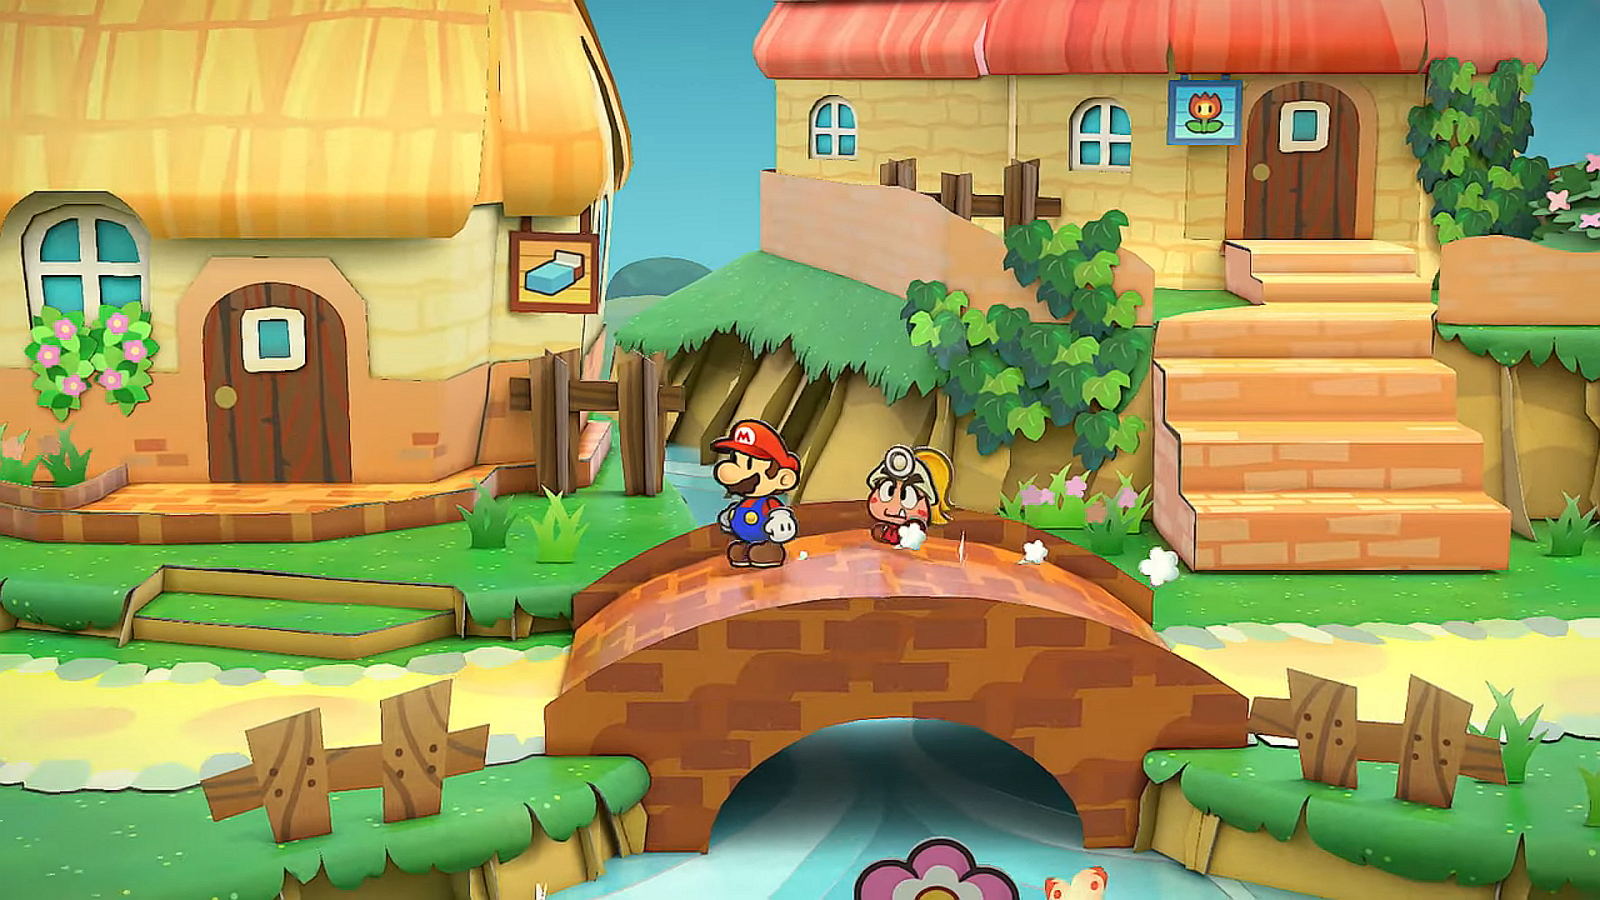 Paper Mario: The Thousand Year Door Is Getting A Switch Remake